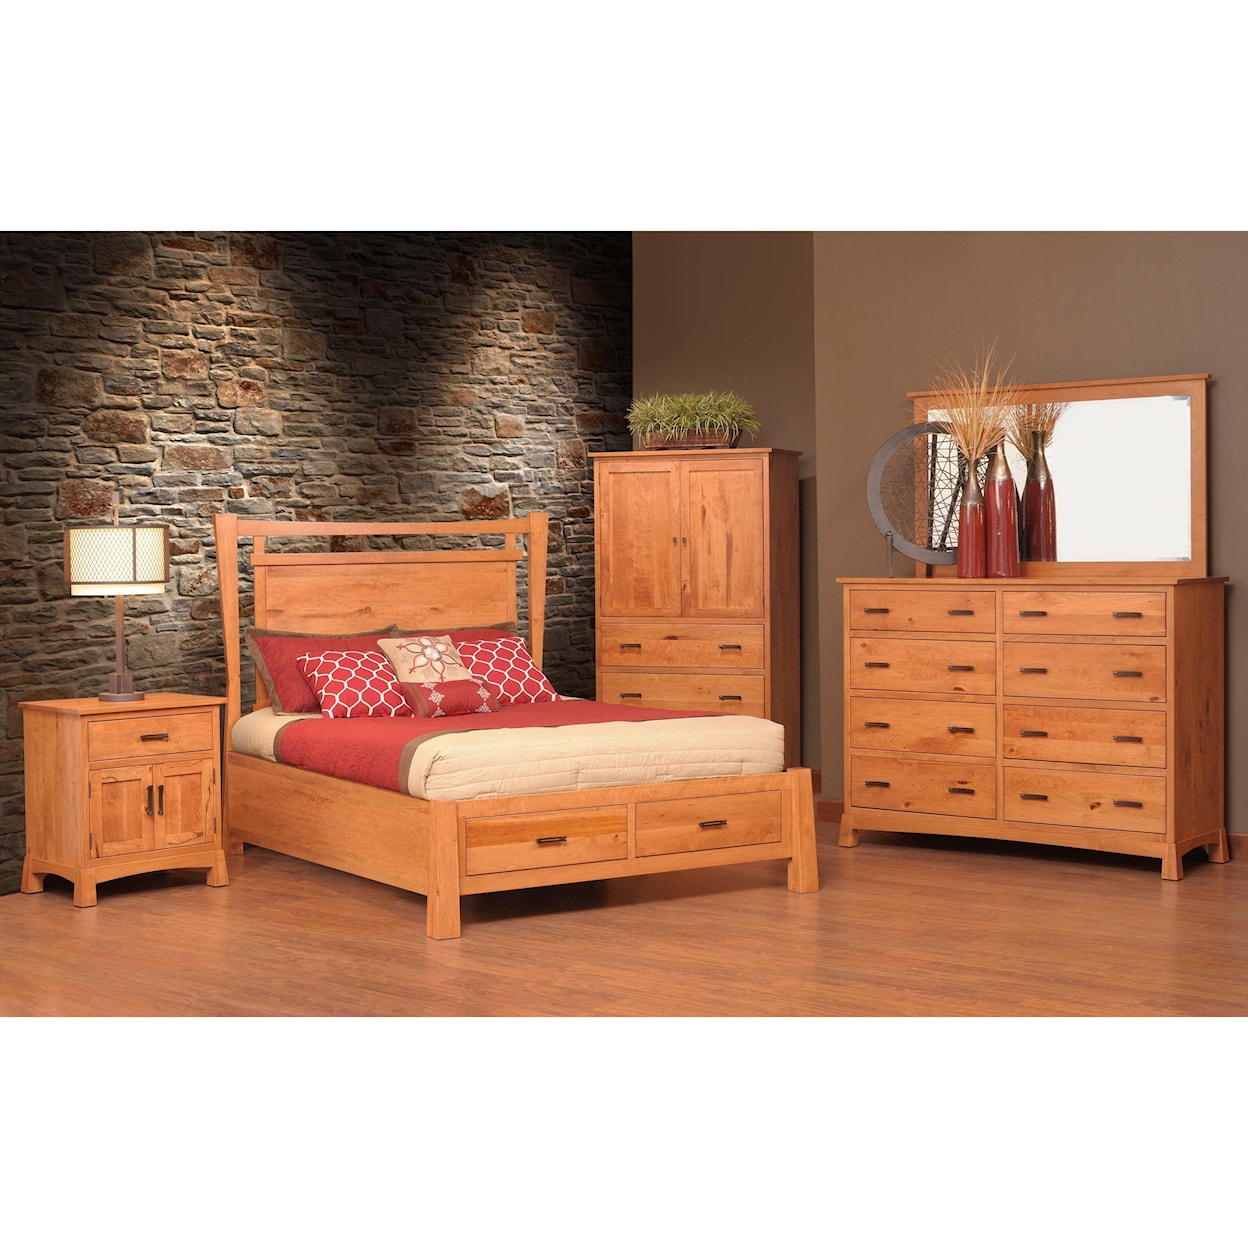 Millcraft Catalina King Bedroom Group